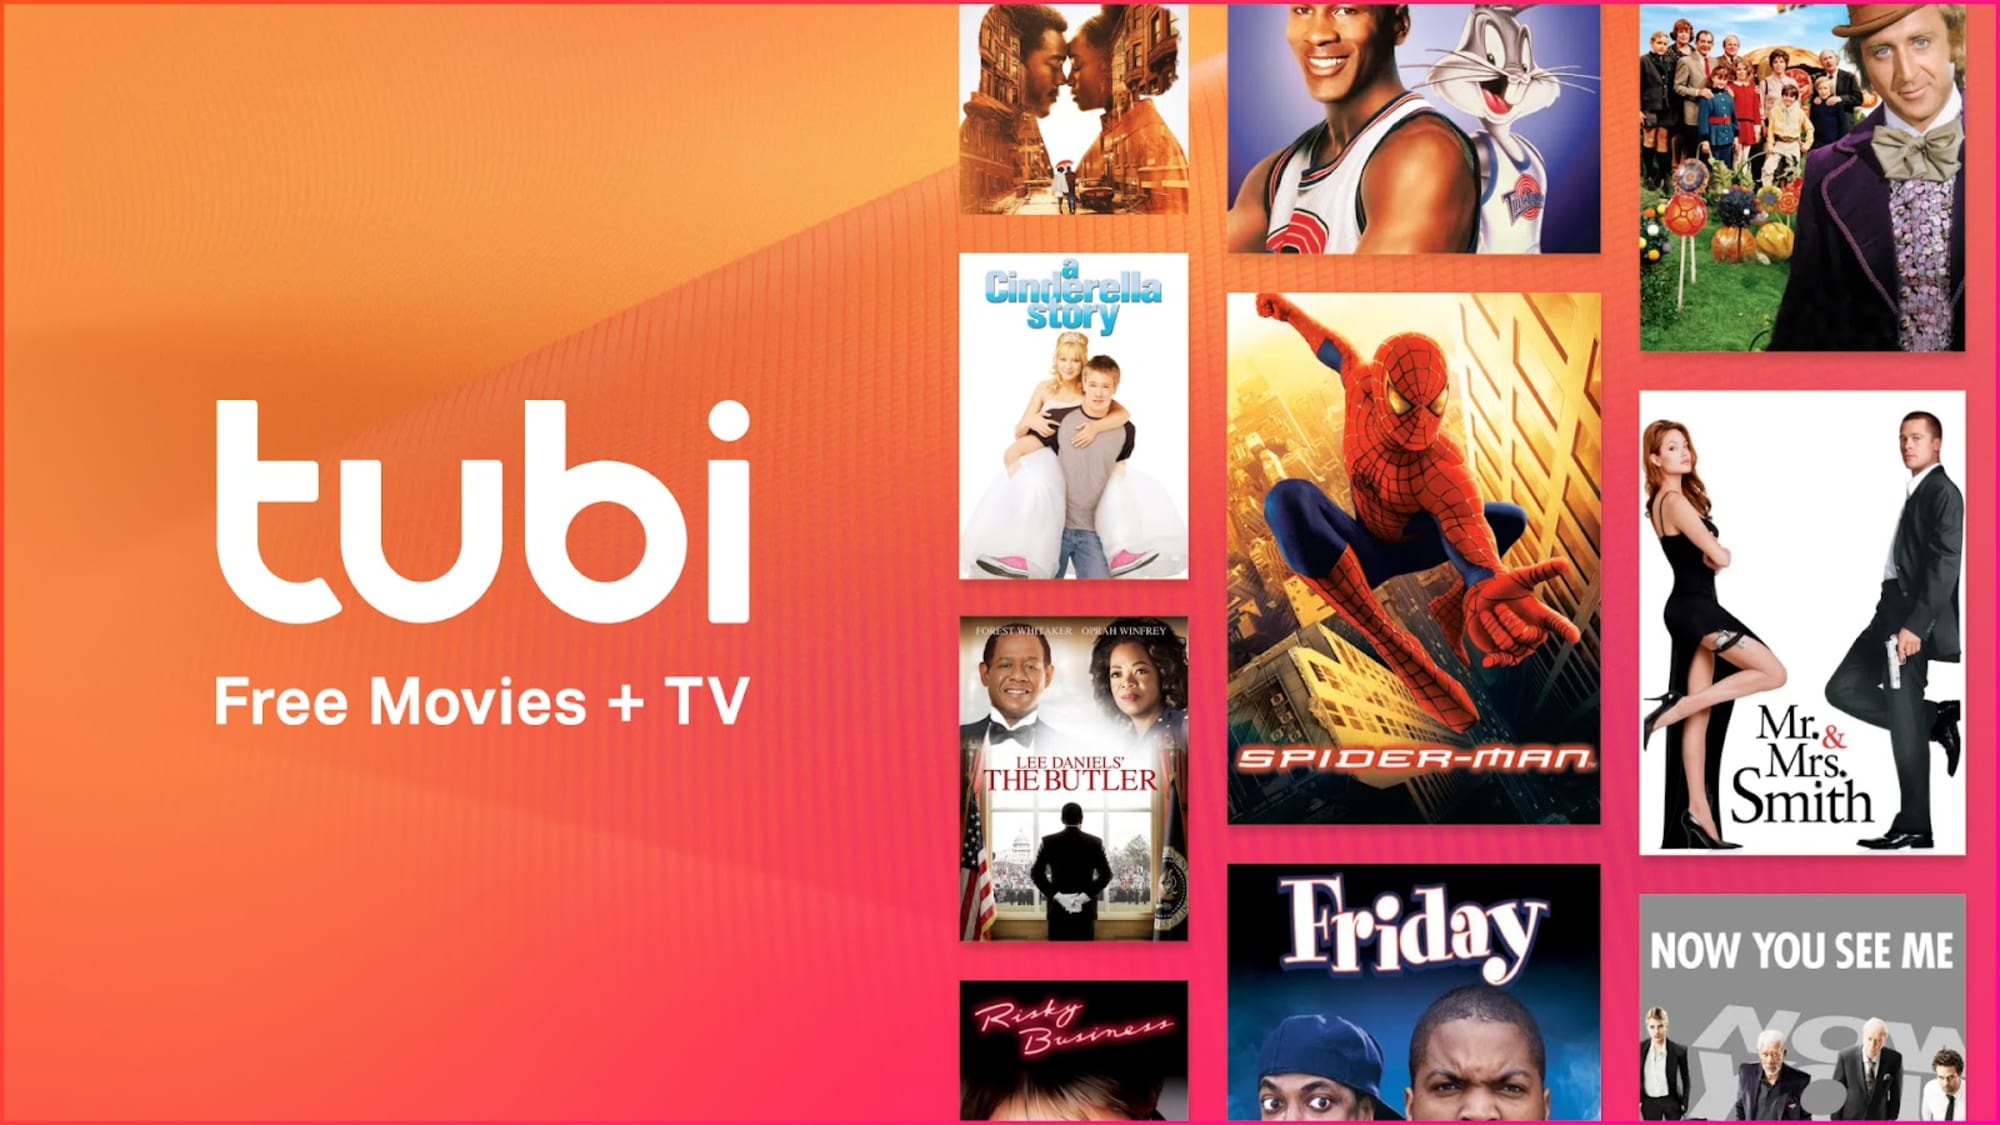 Fall in love with the horror films coming to Tubi in February